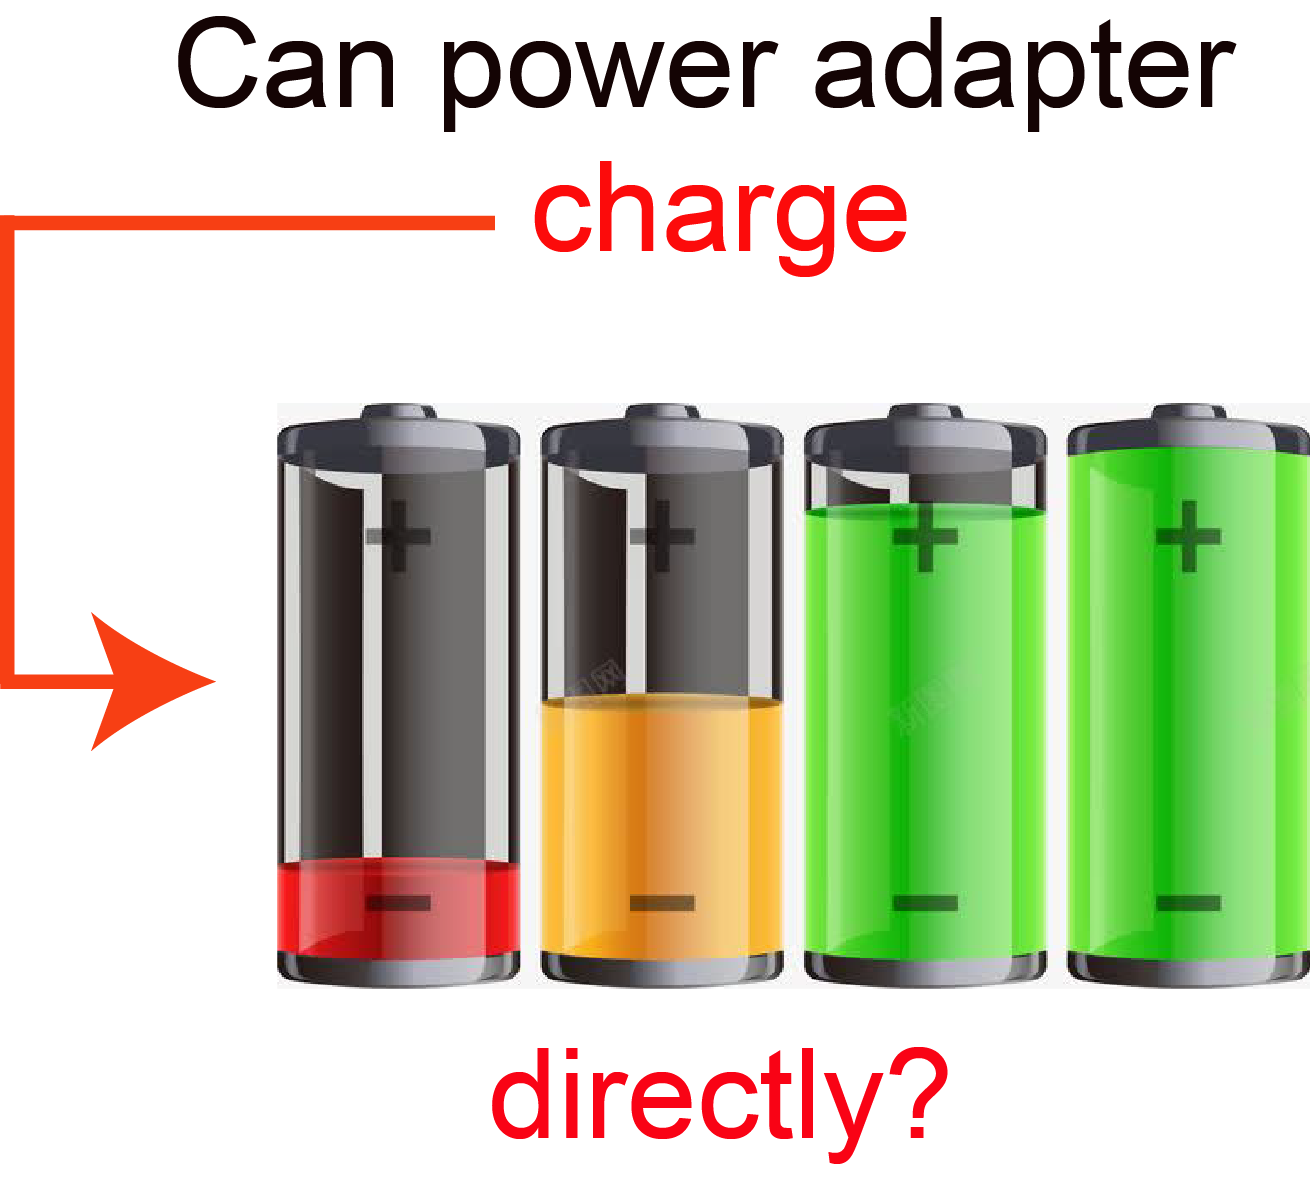 What is the difference between power adapter and charger?